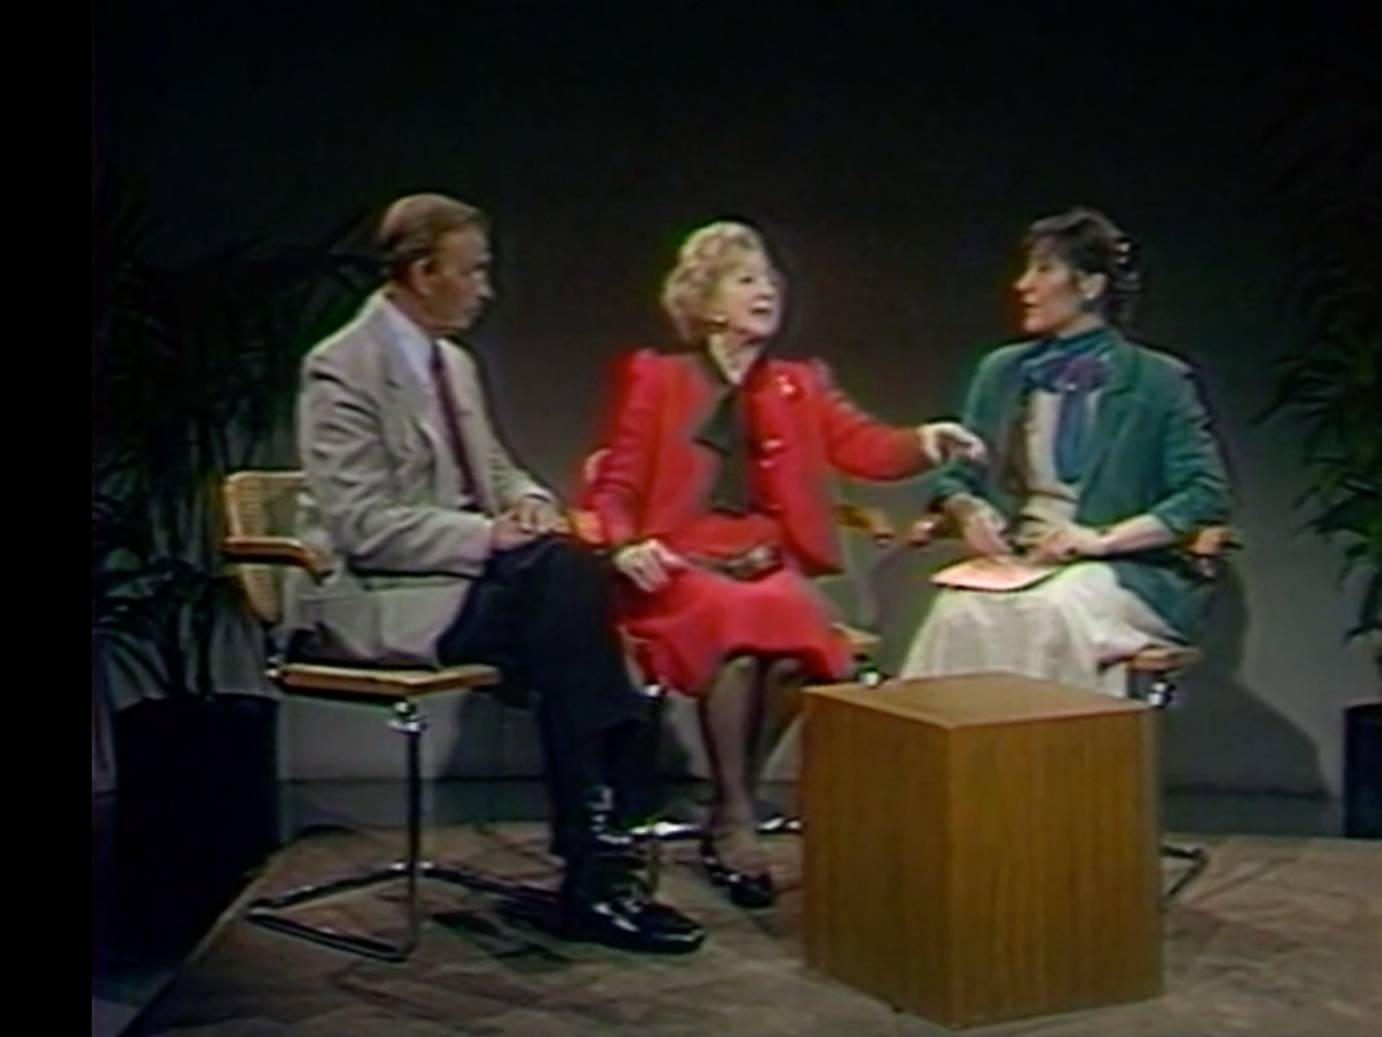 an interview, 2 legendary older ballet dancers are interviewed. Man is white light jacket, dark pants tie, woman is in bright red suit jacket and dark top, the interview a light skinned woman with dark hair is wearing a green jacket over a white dress with blue scarf